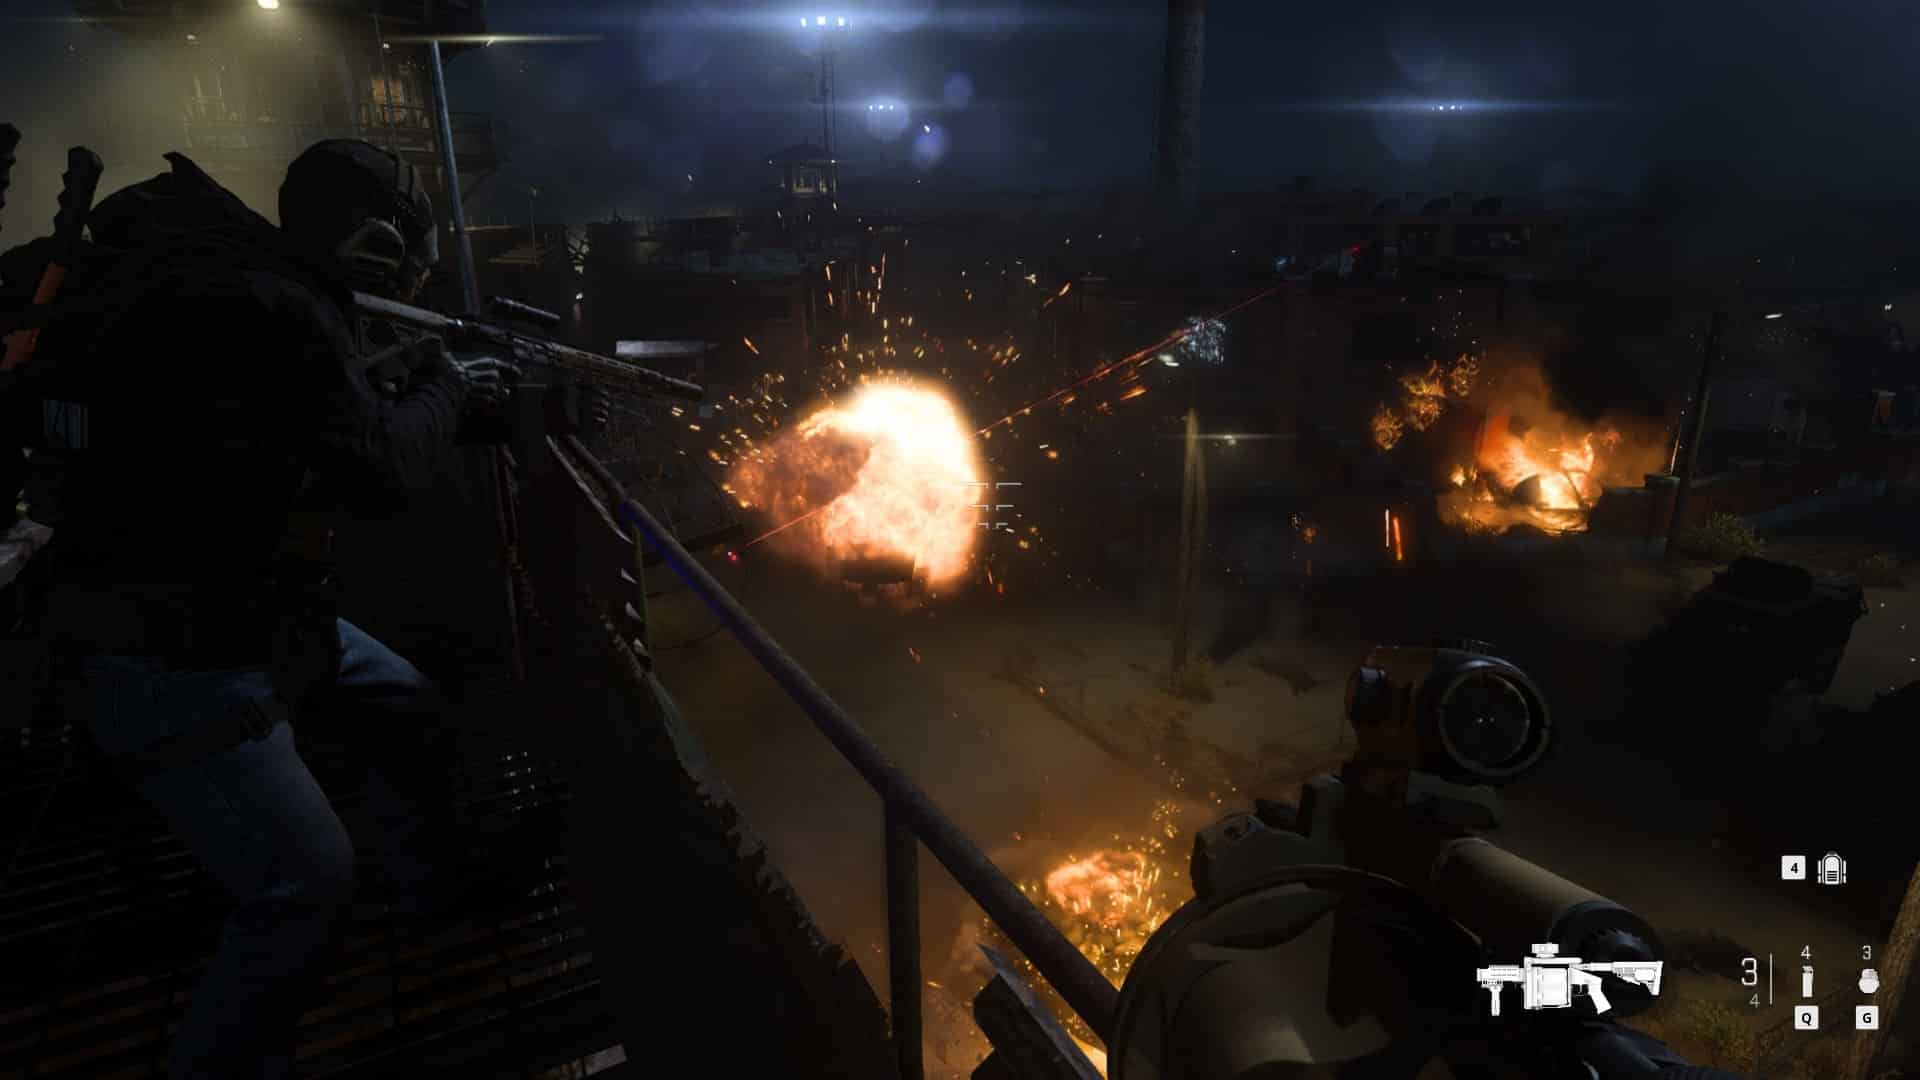 (The enemies on the rooftop have sniper rifles. But we have a 40mm grenade launcher!)